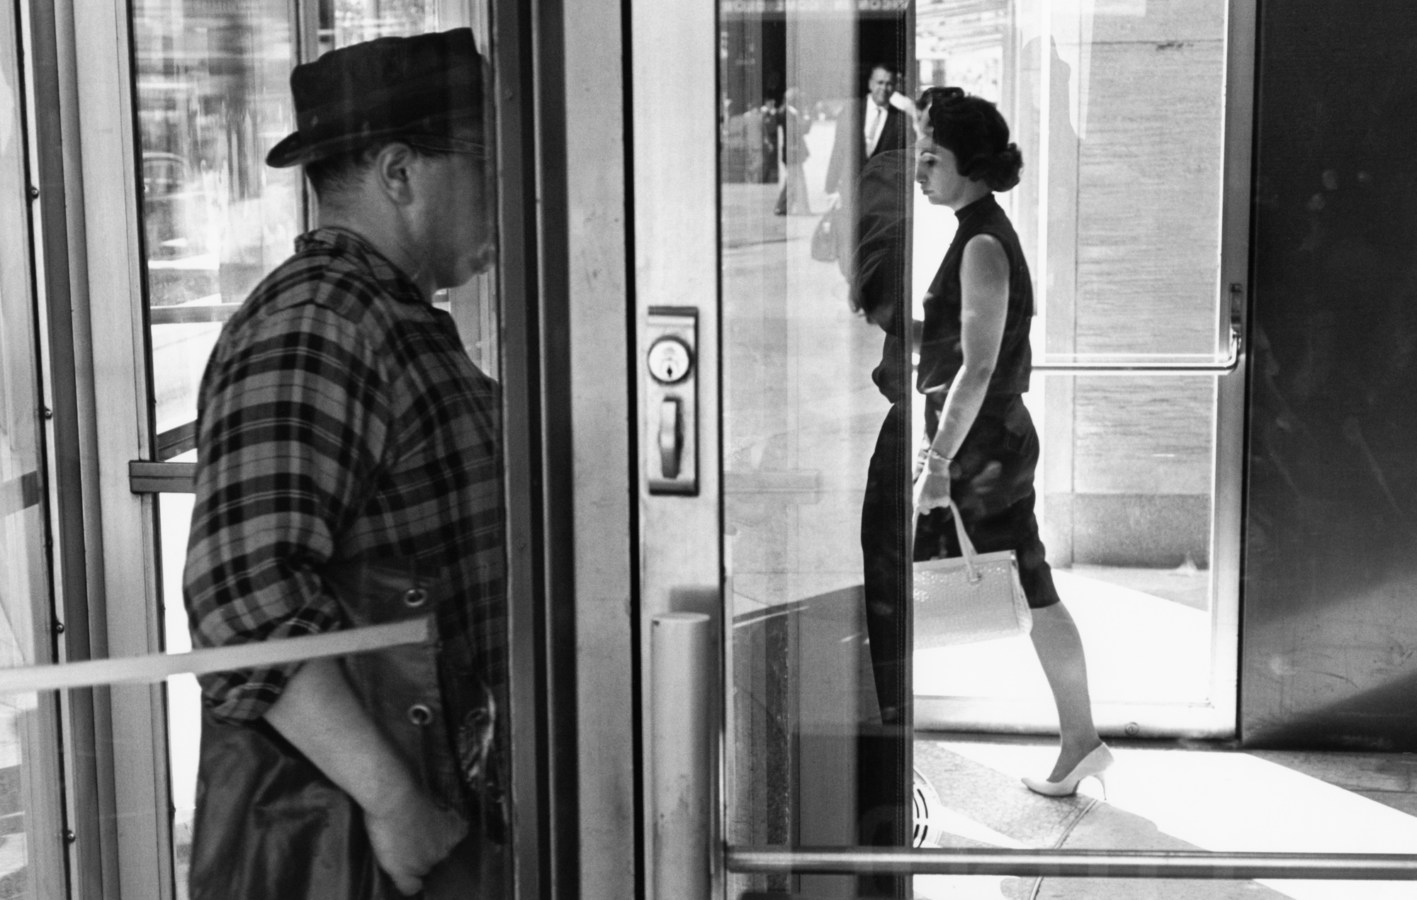 Black-and-white photograph of a man and woman entering and exiting a building with their faces obscured by doors